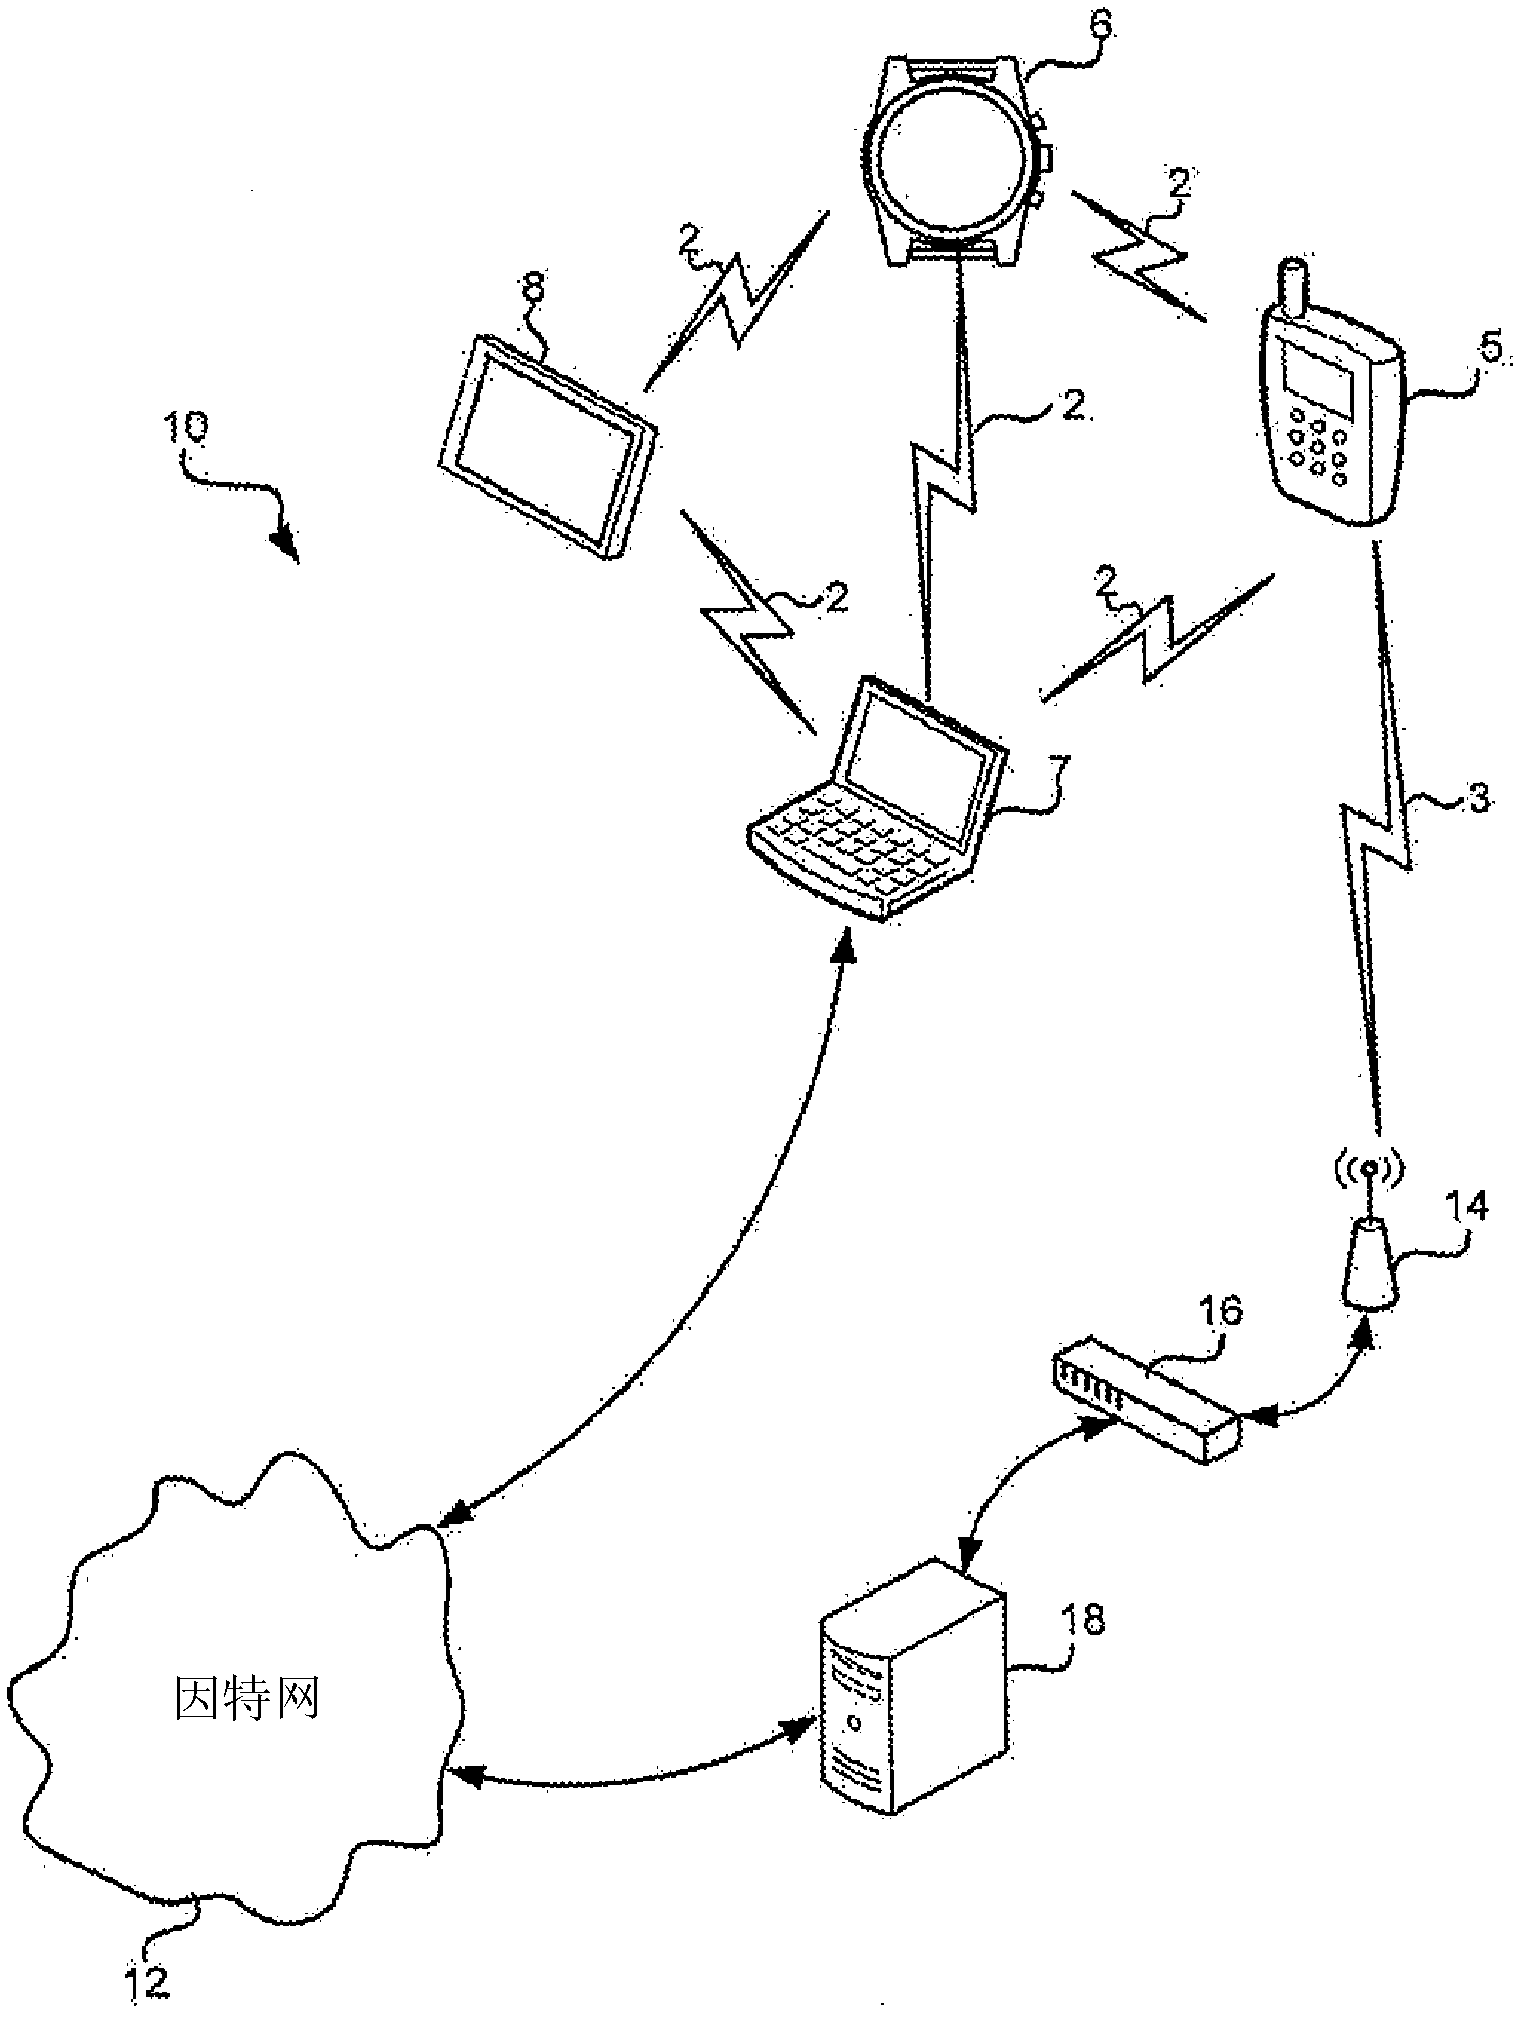 Method and apparatus for providing application interface portions on peripheral computing devices